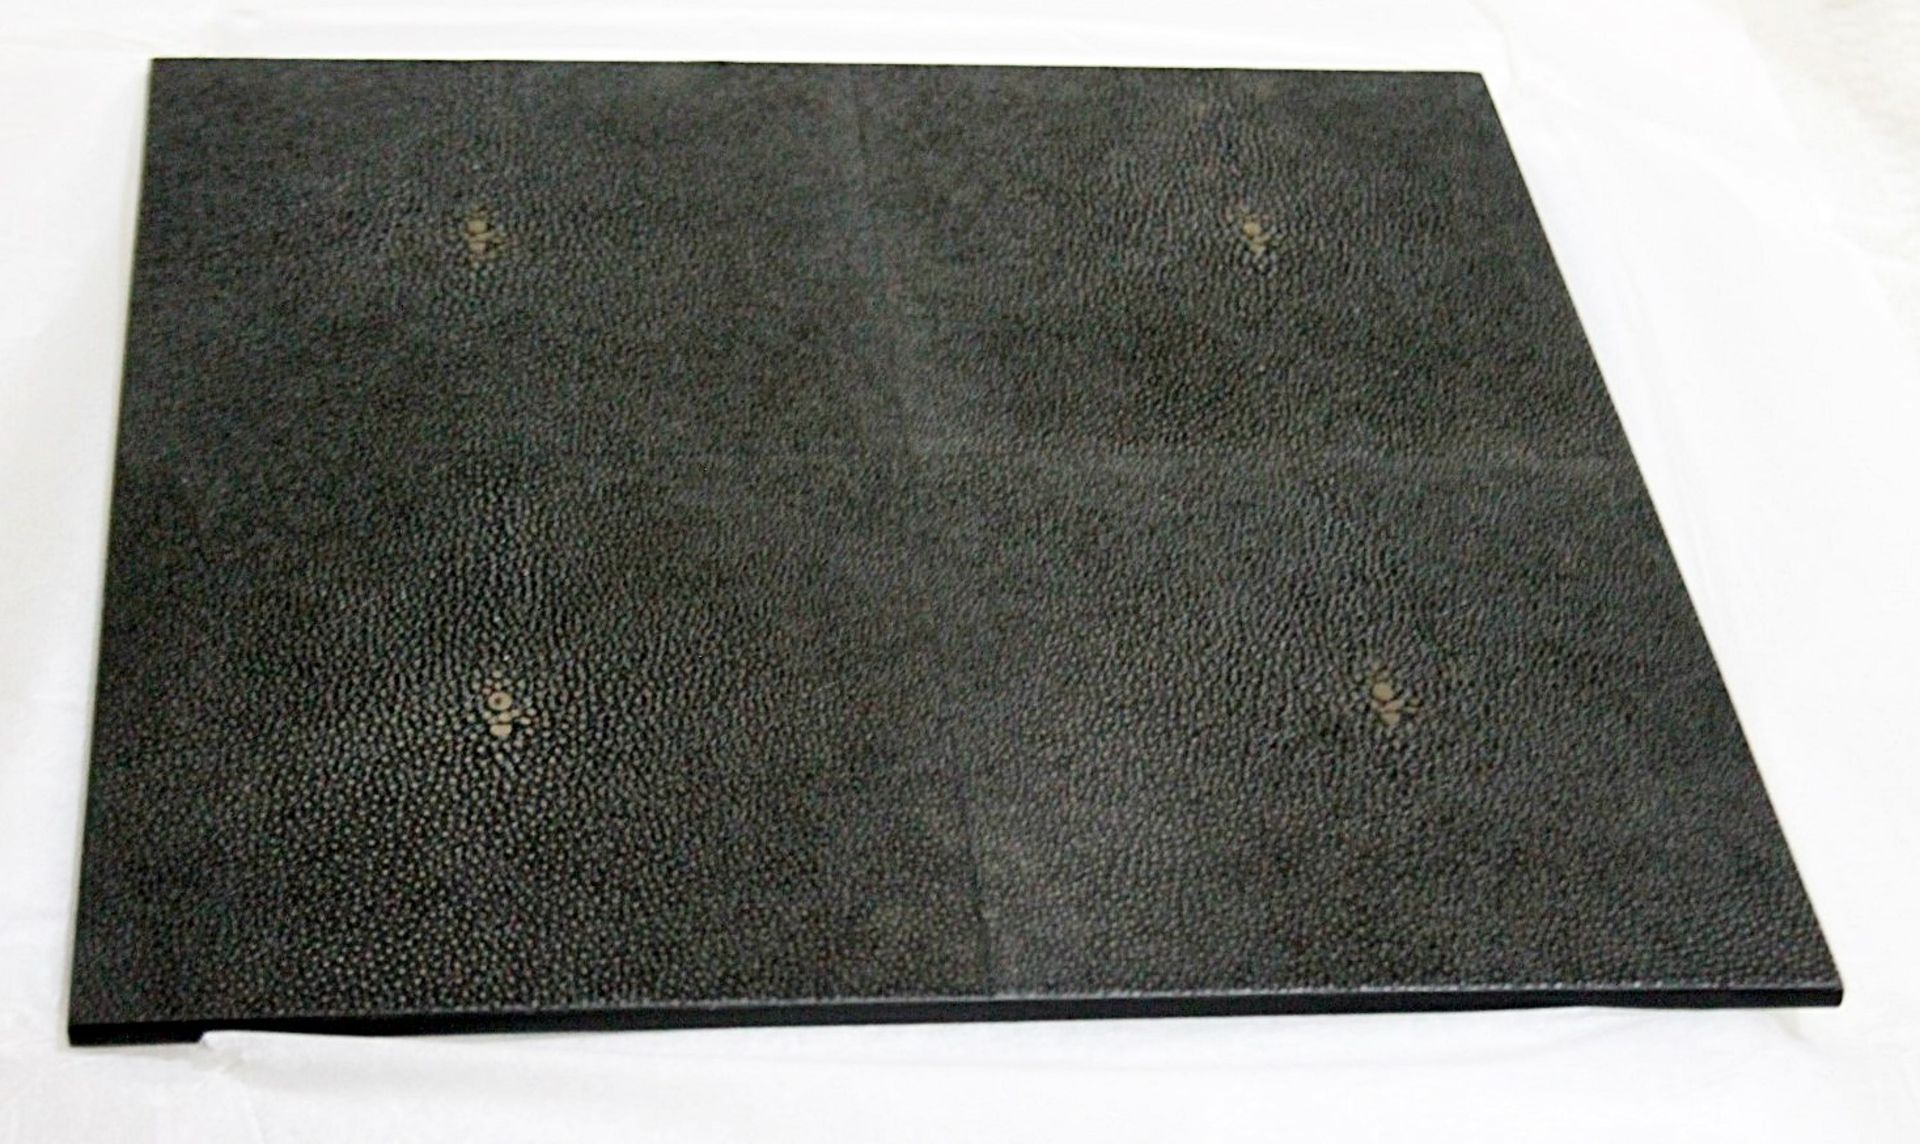 5 x POSH TRADING COMPANY Coastbox with Faux Shagreen Double Coaster Place Mats - Current Retail - Image 3 of 5